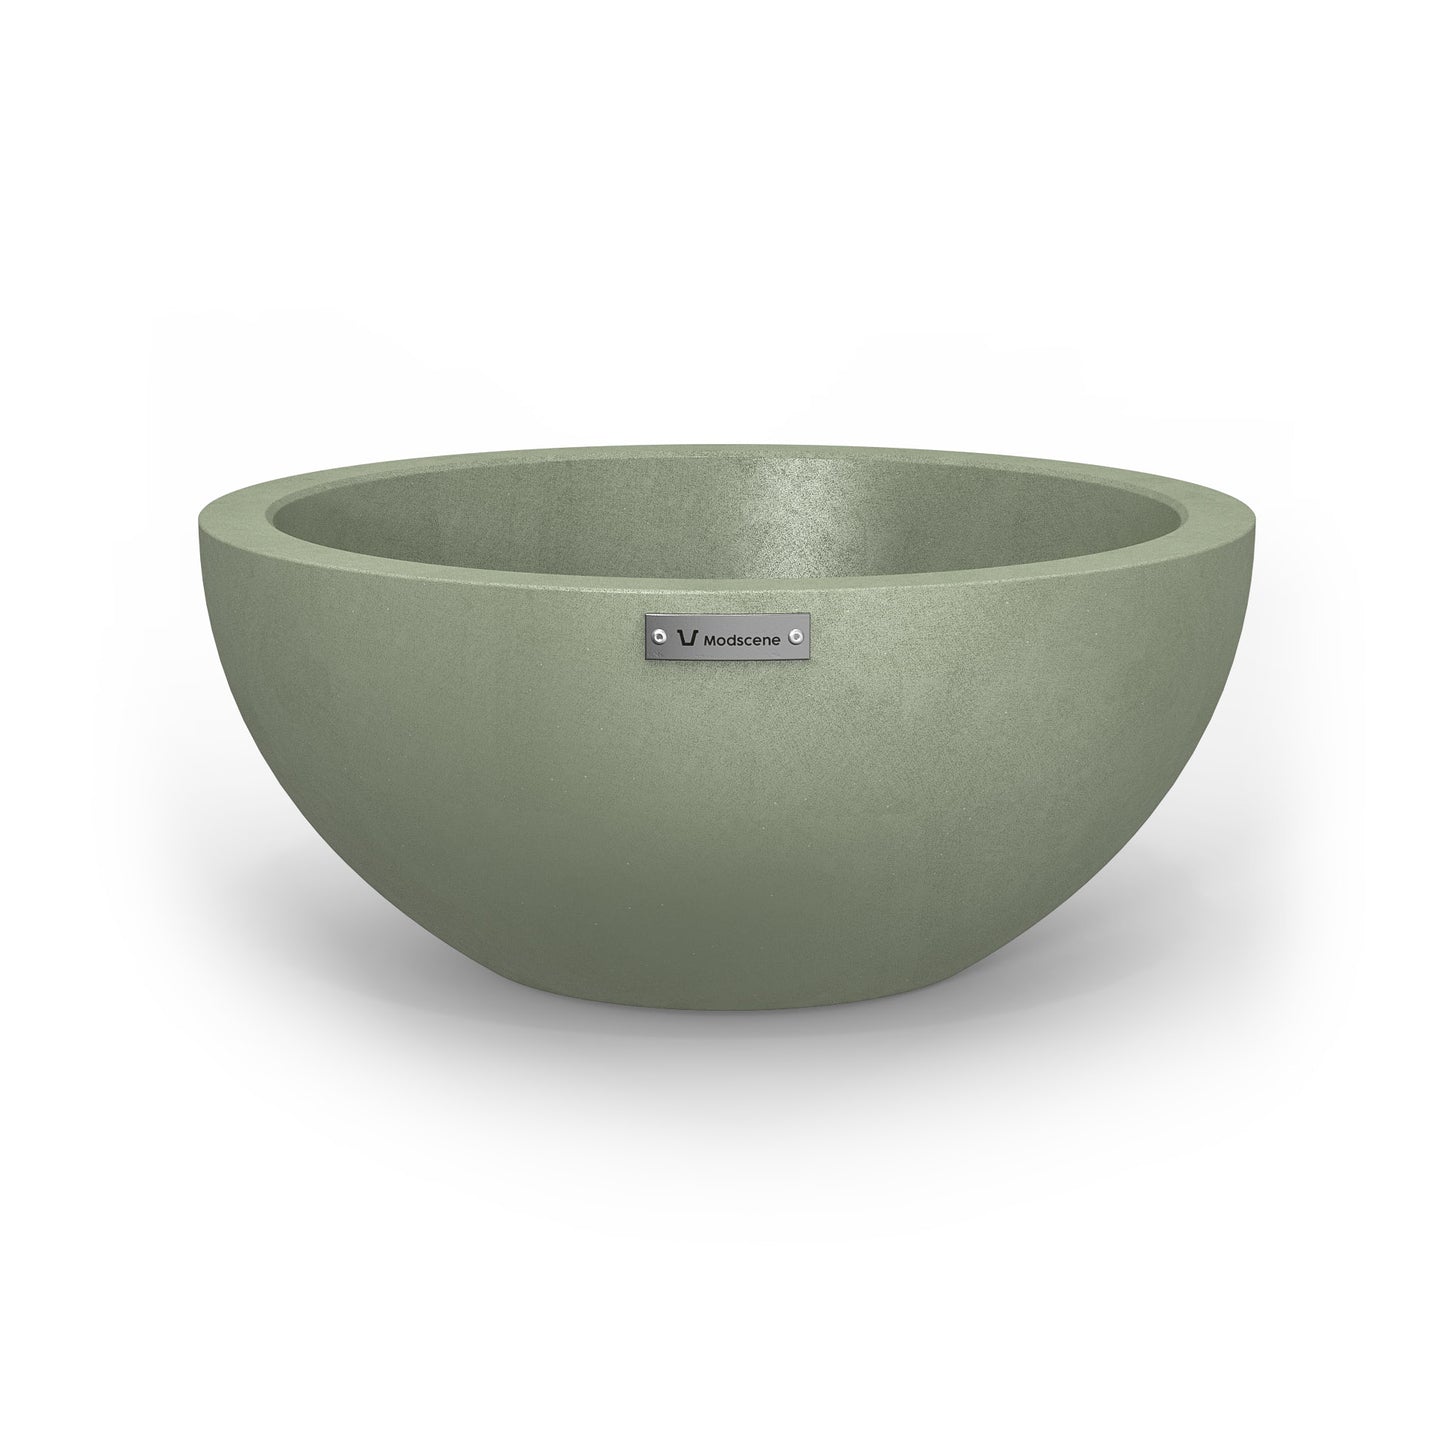 A small planter bowl in a pastel green colour with a concrete look finish.